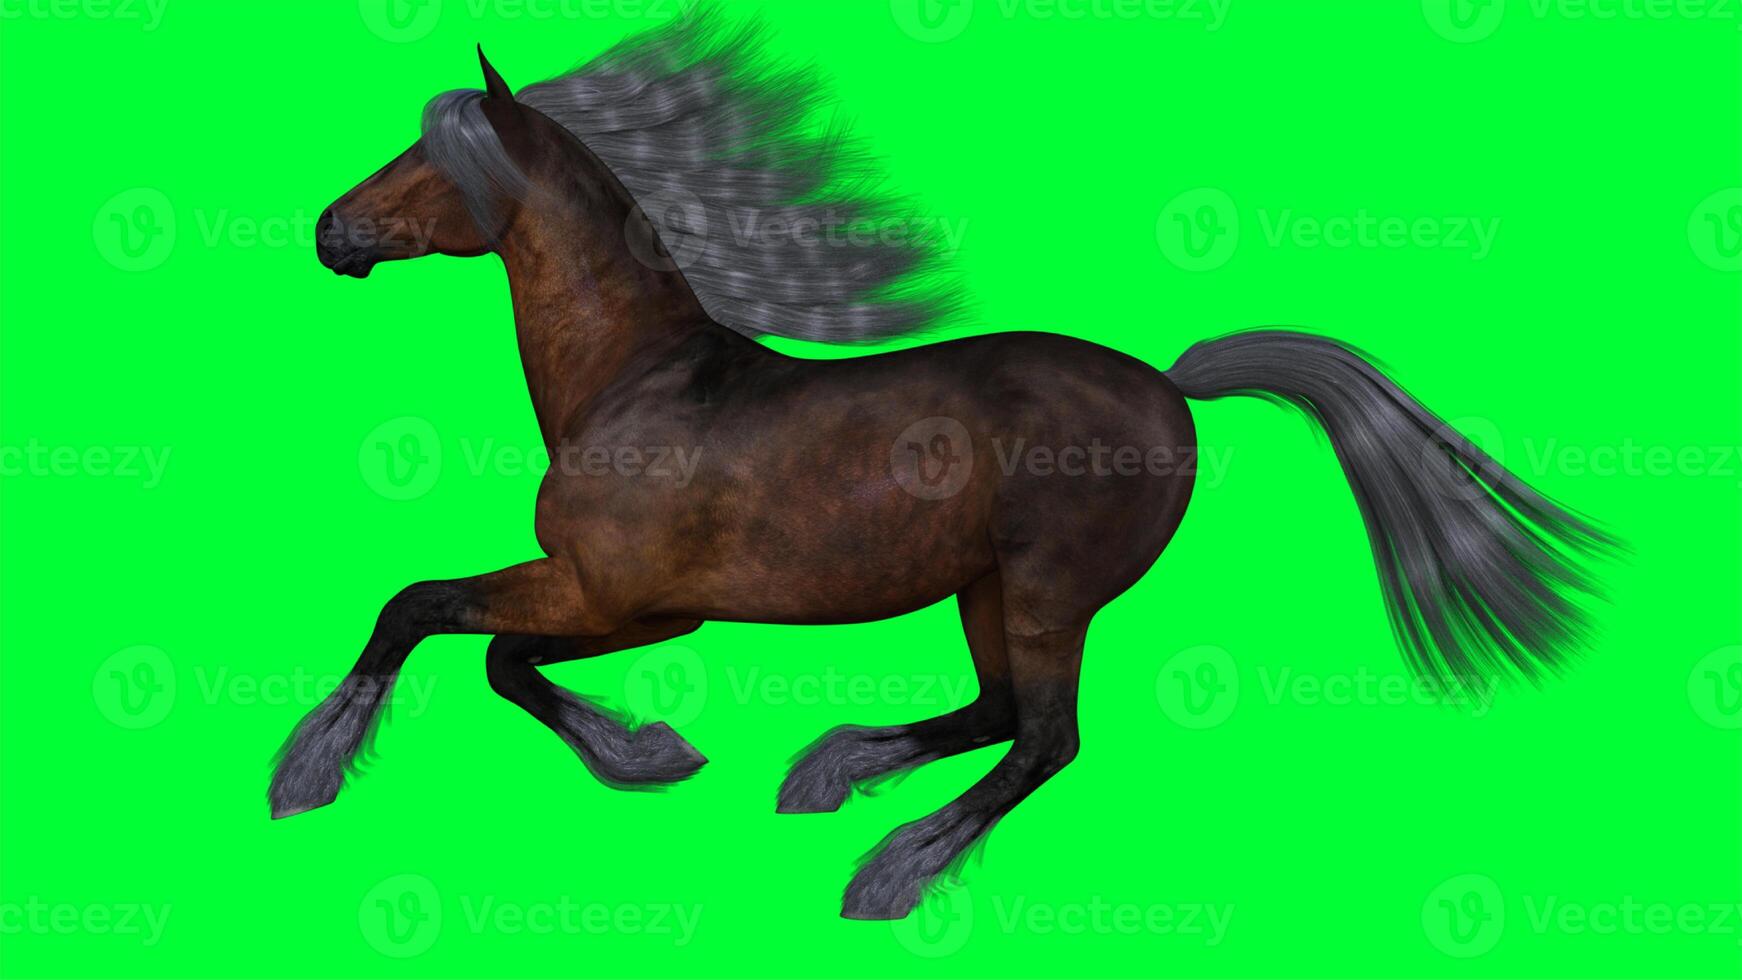 Horse on a green screen photo